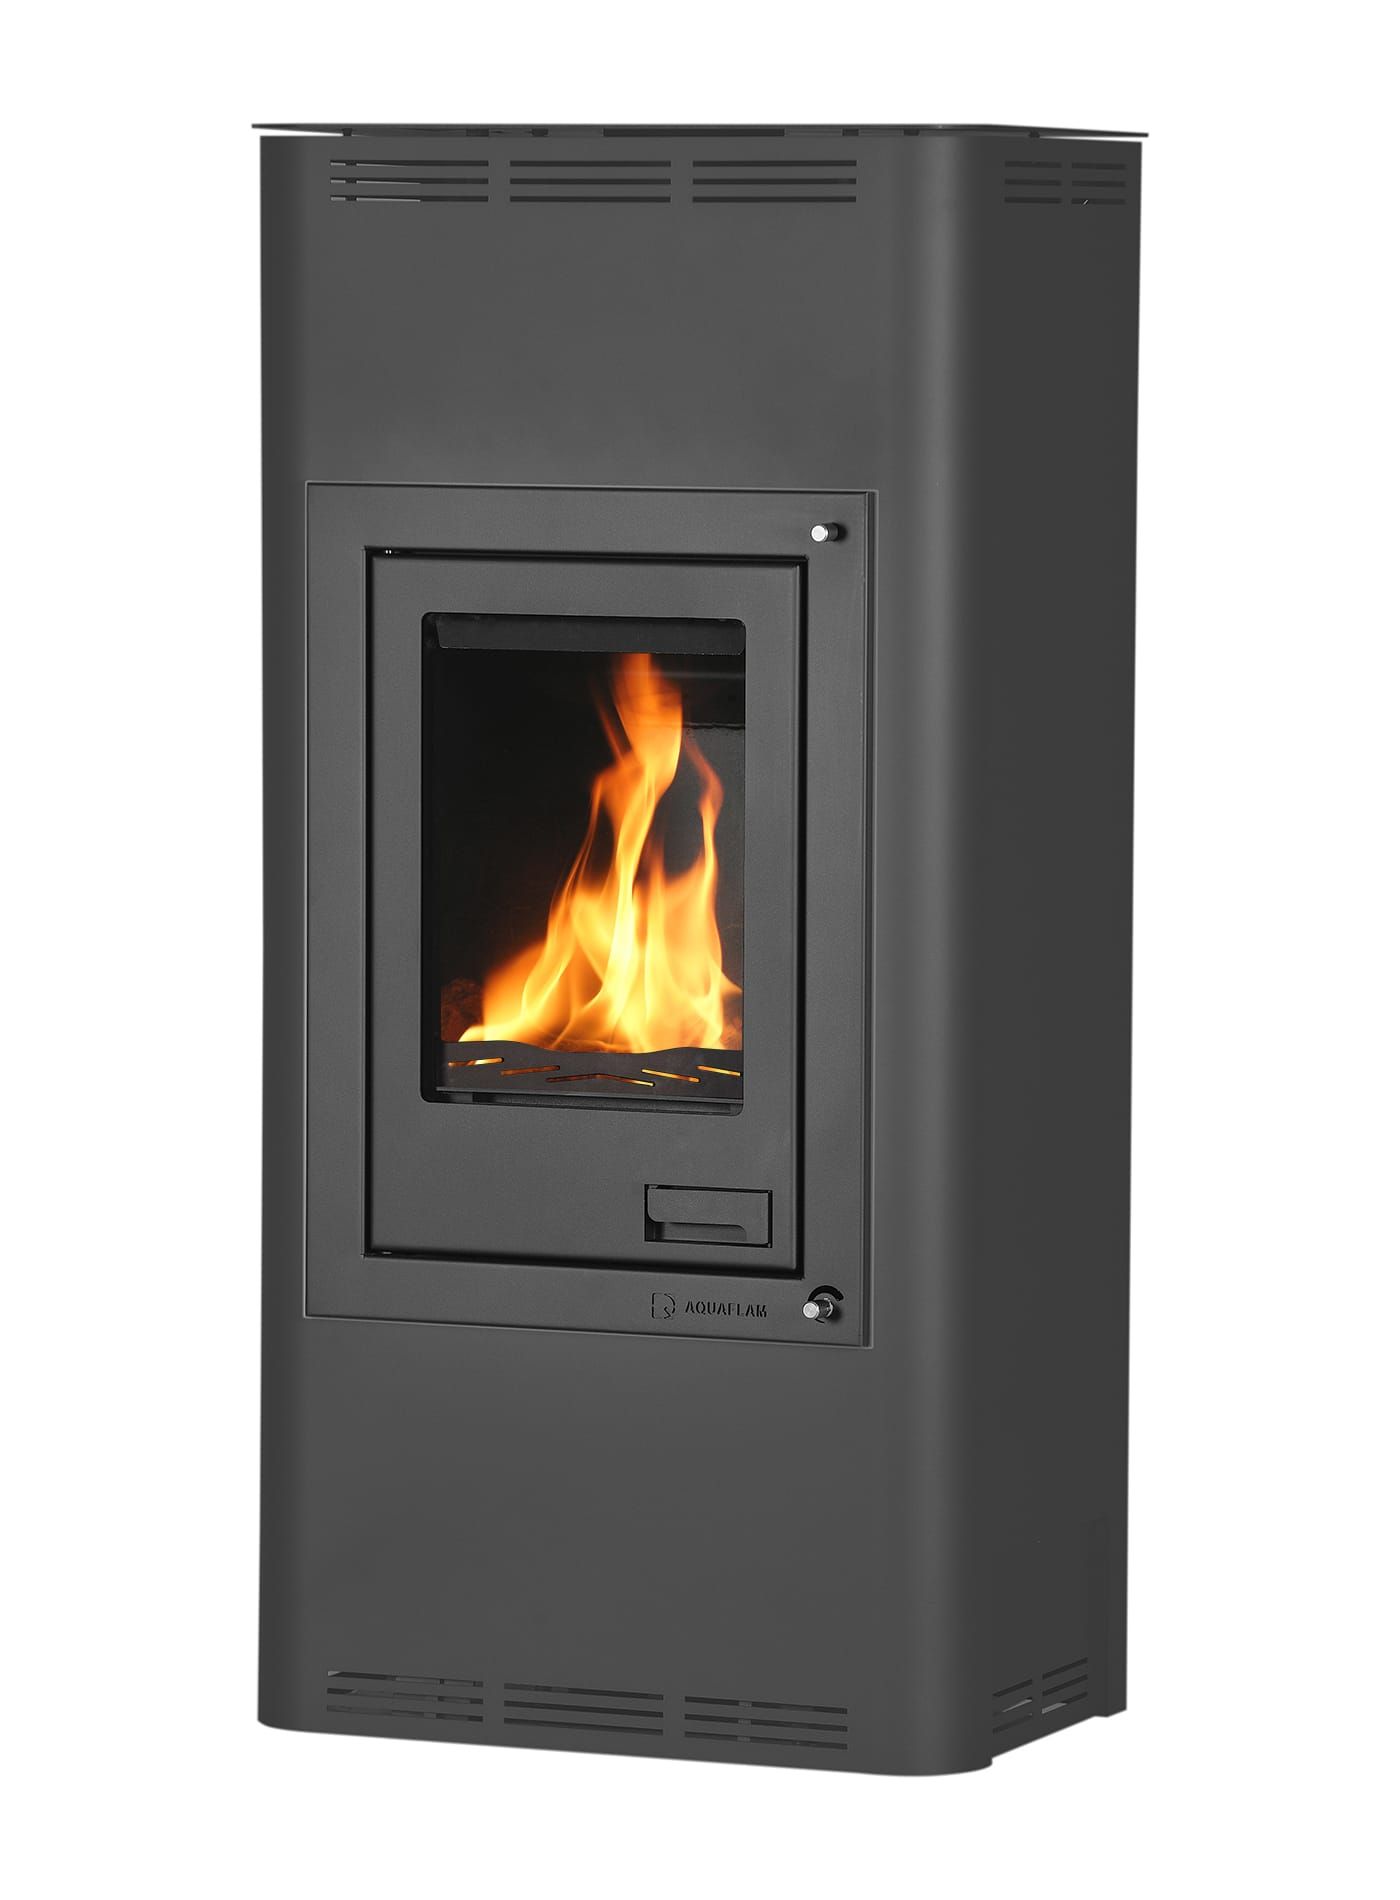 Aquaflam central heating fireplace 7 kW